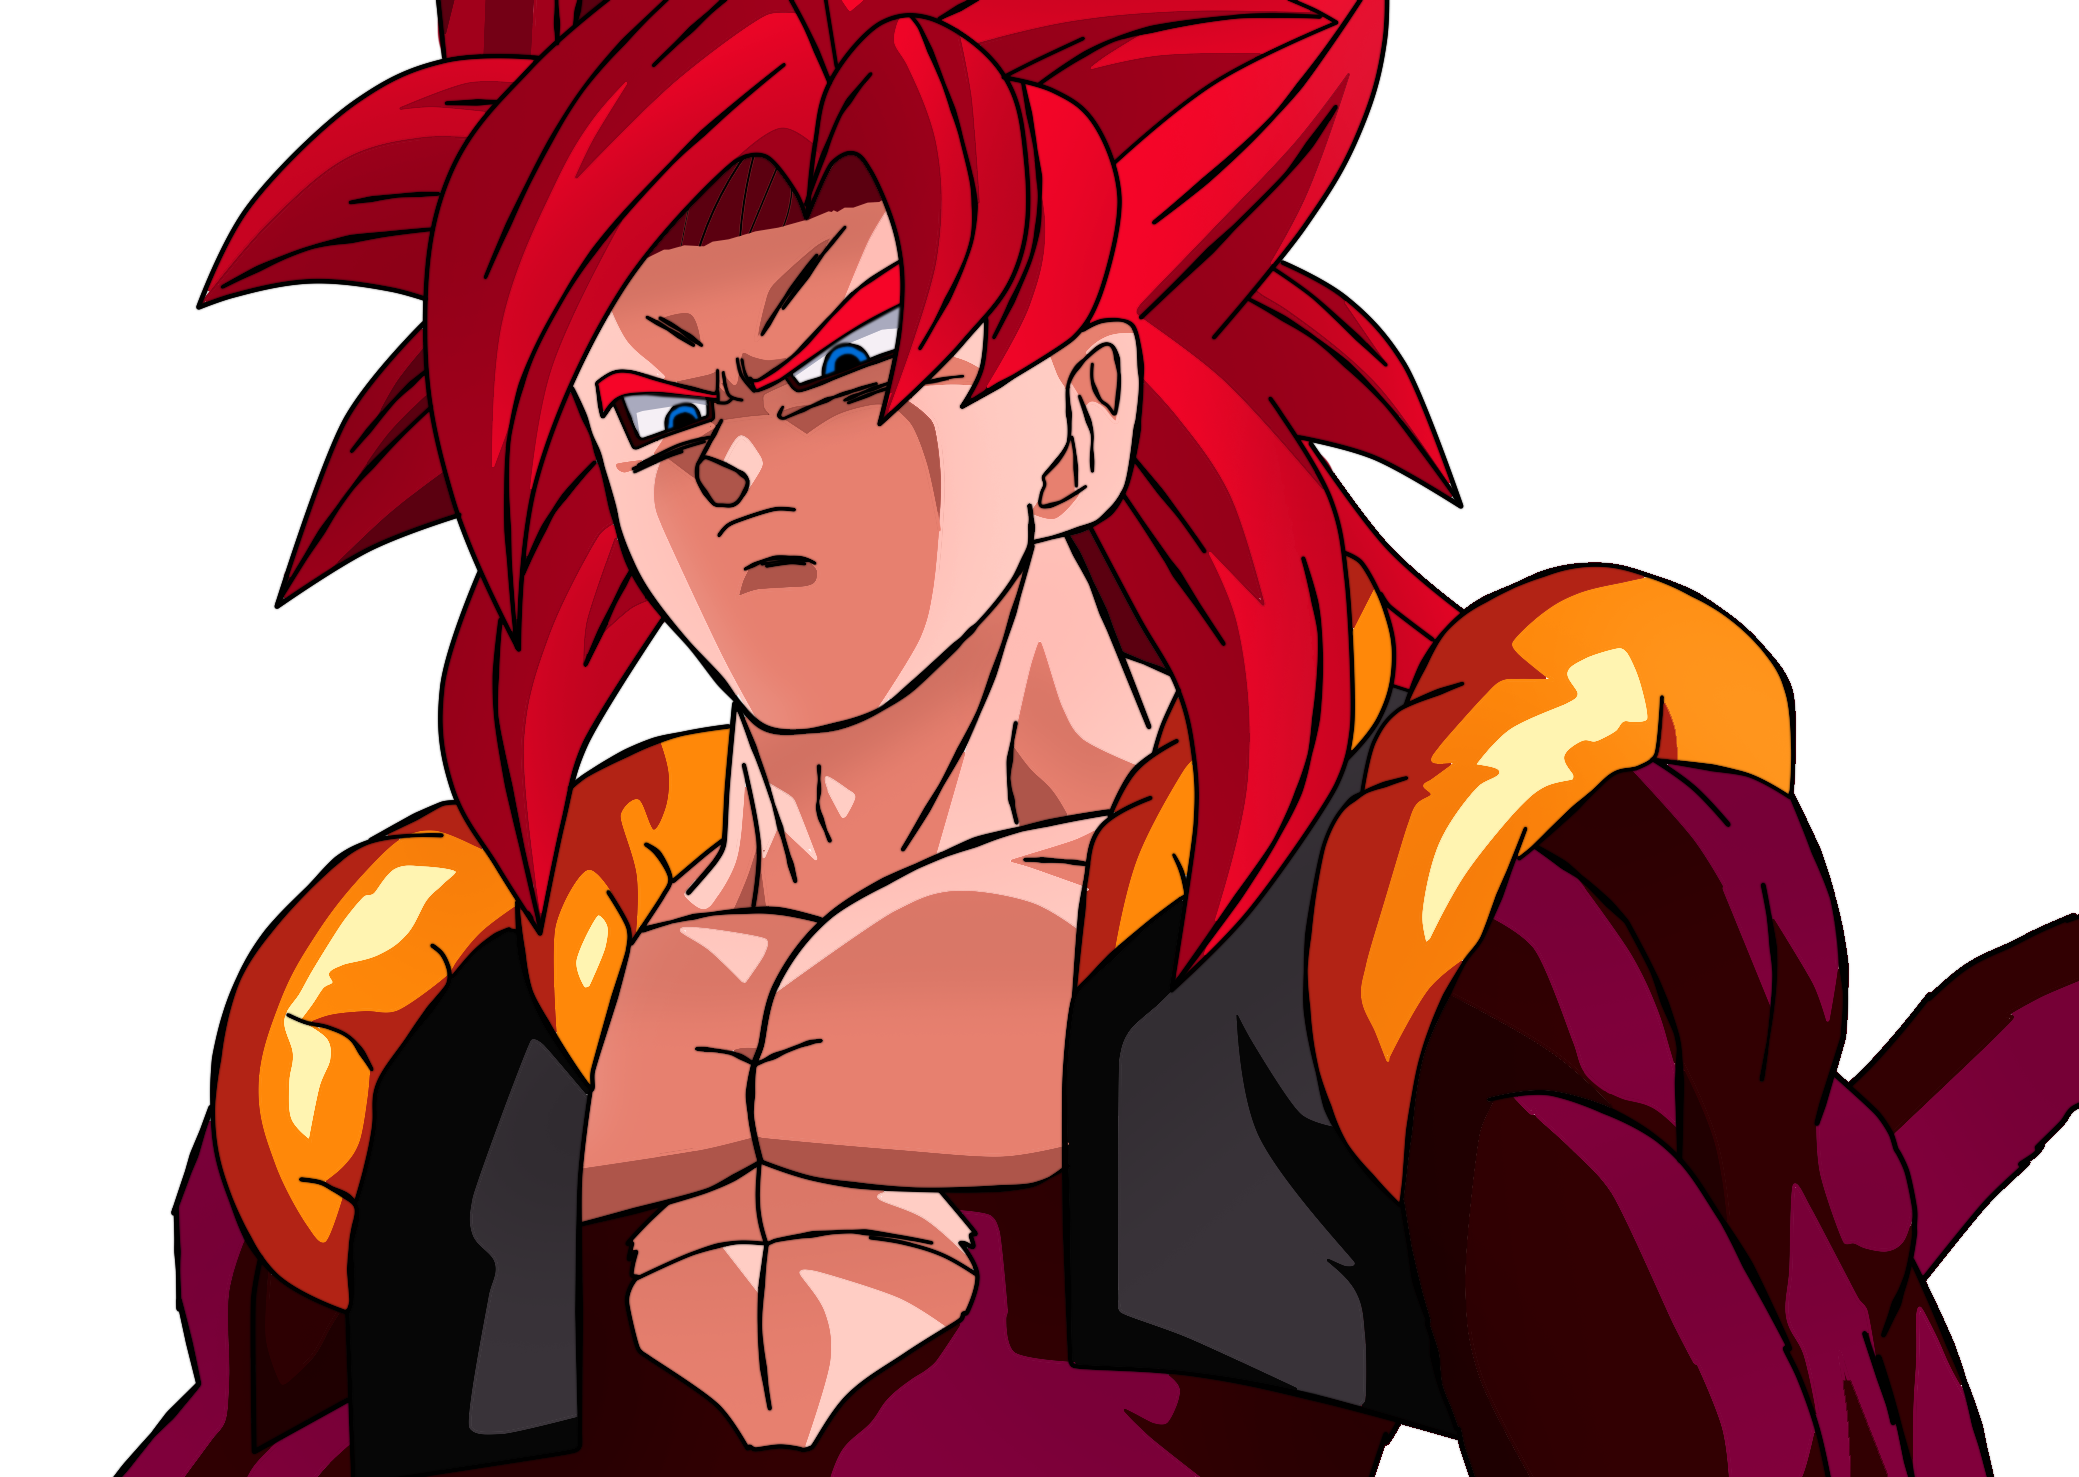 Gogeta ss 4 Animated Picture Codes and Downloads #89918266,421655702